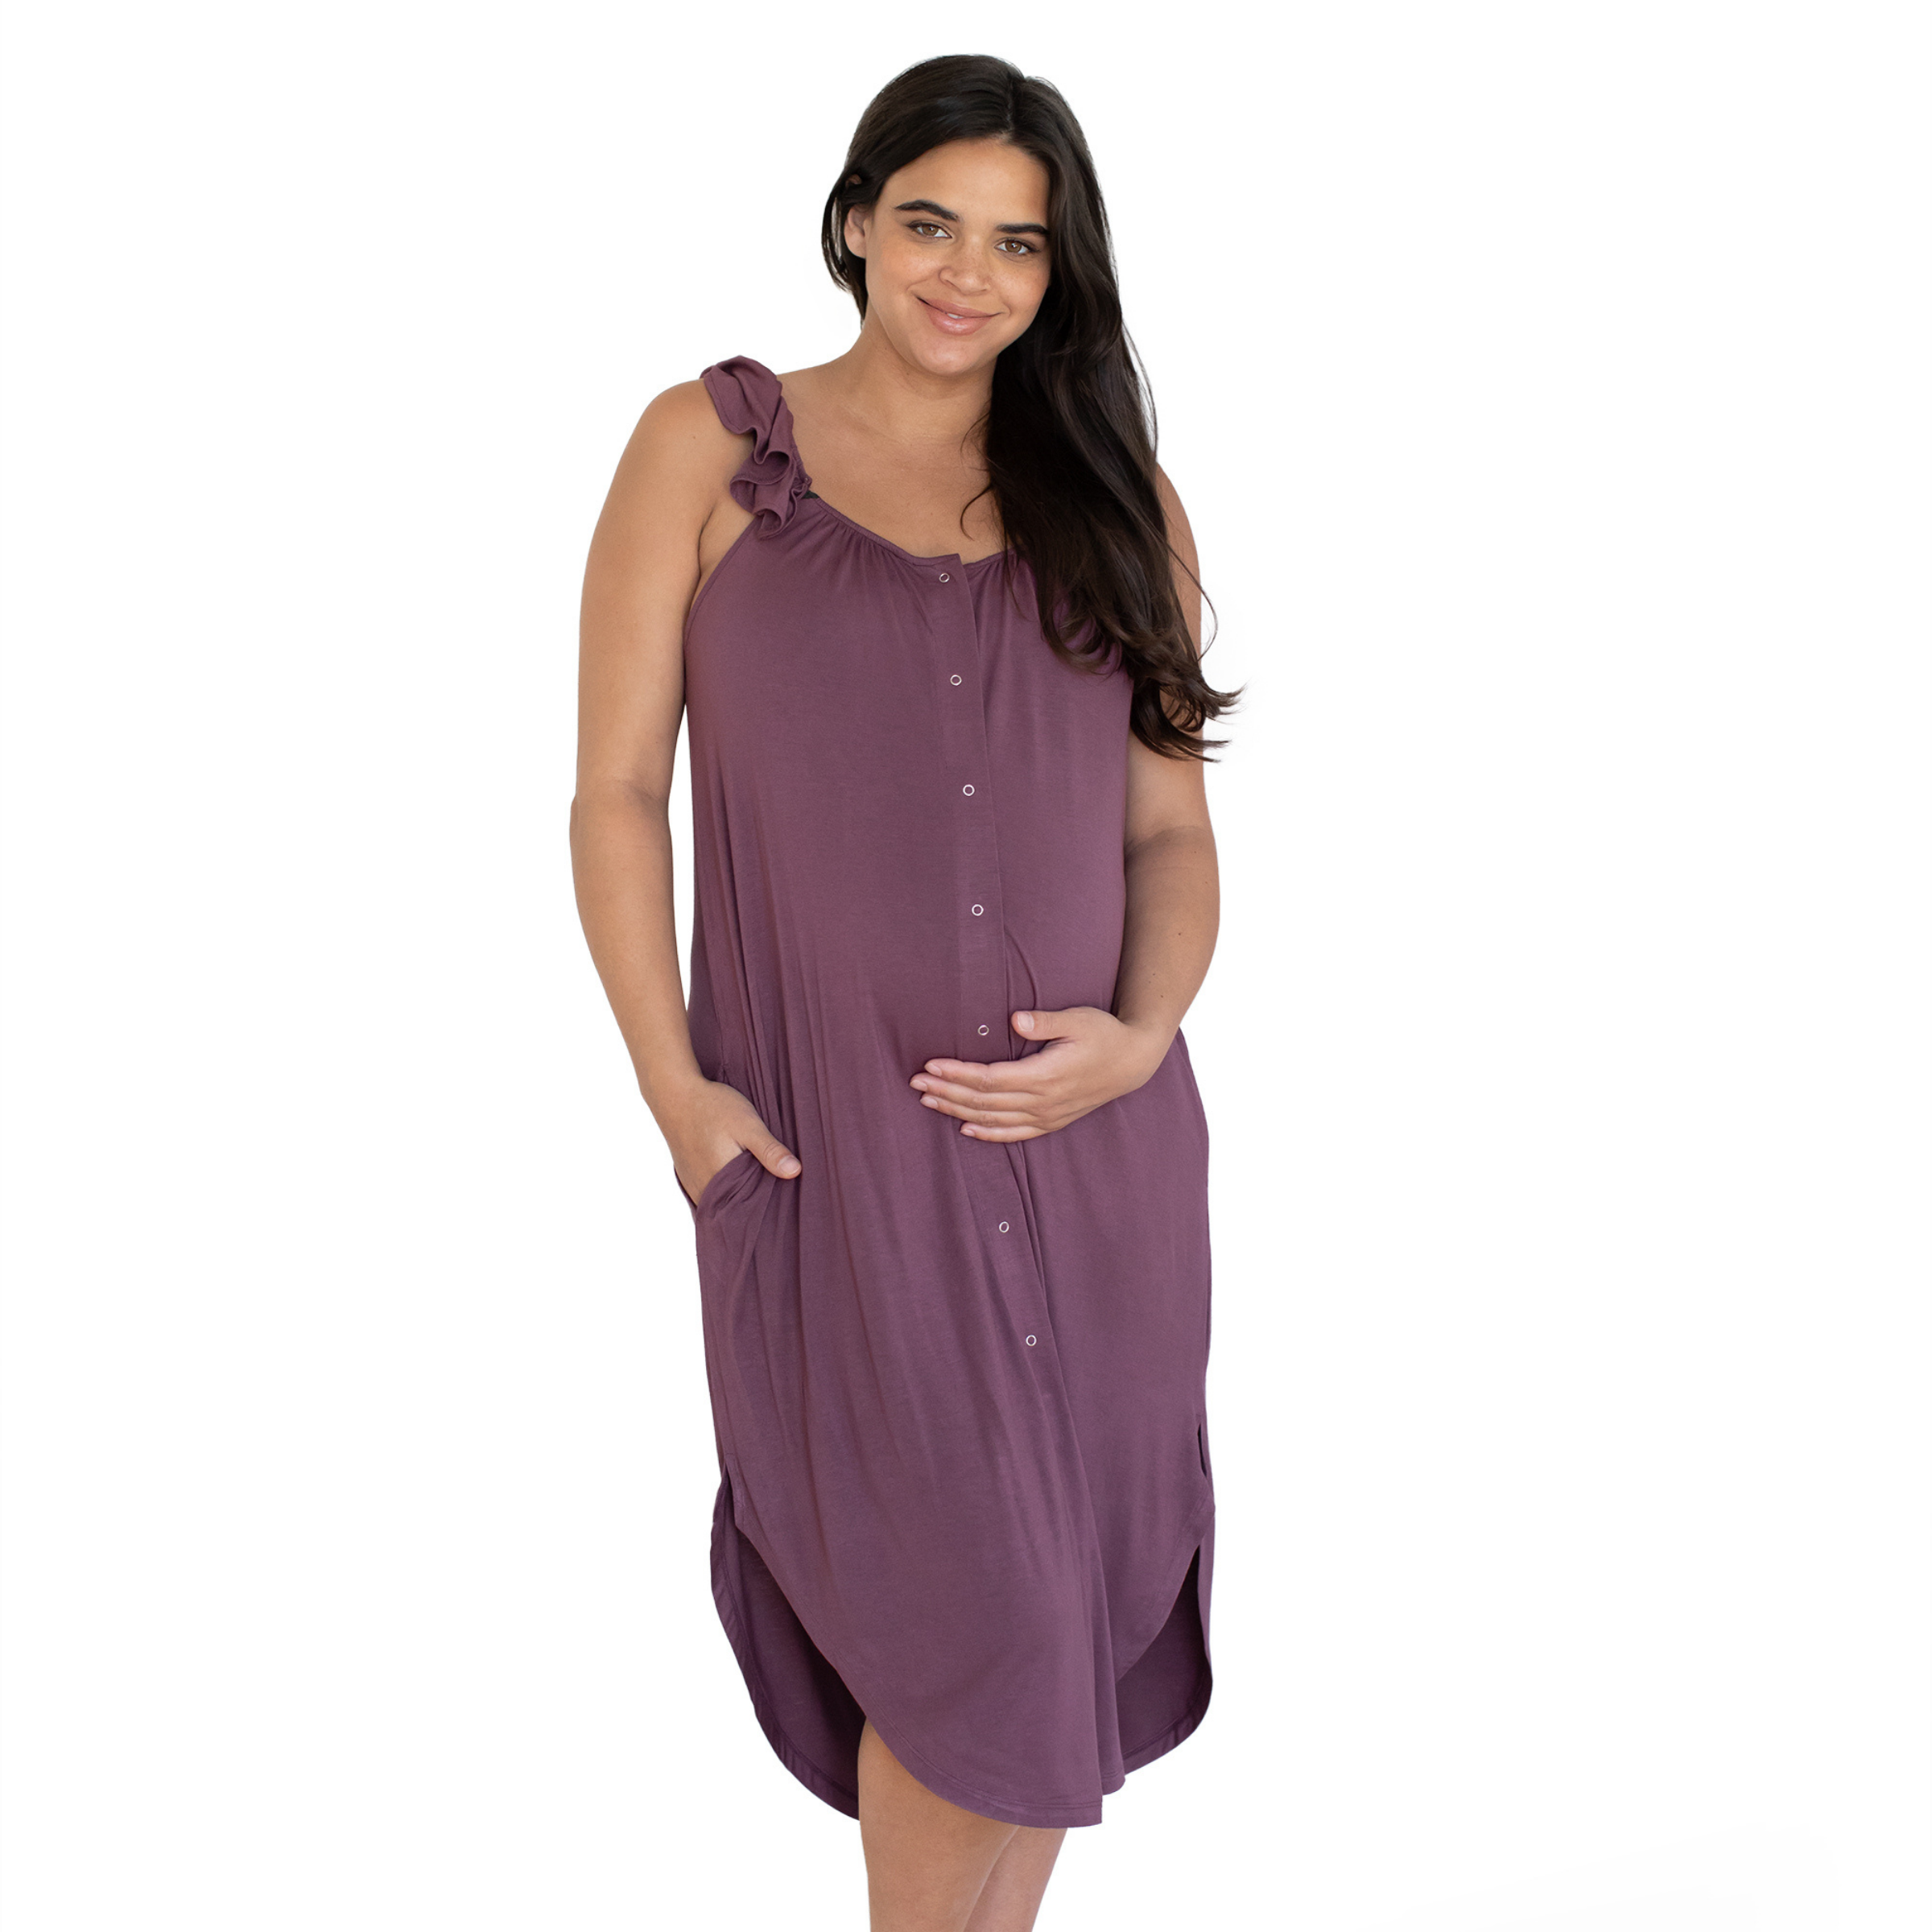 Ruffle Strap Labor & Delivery Gown - Plum